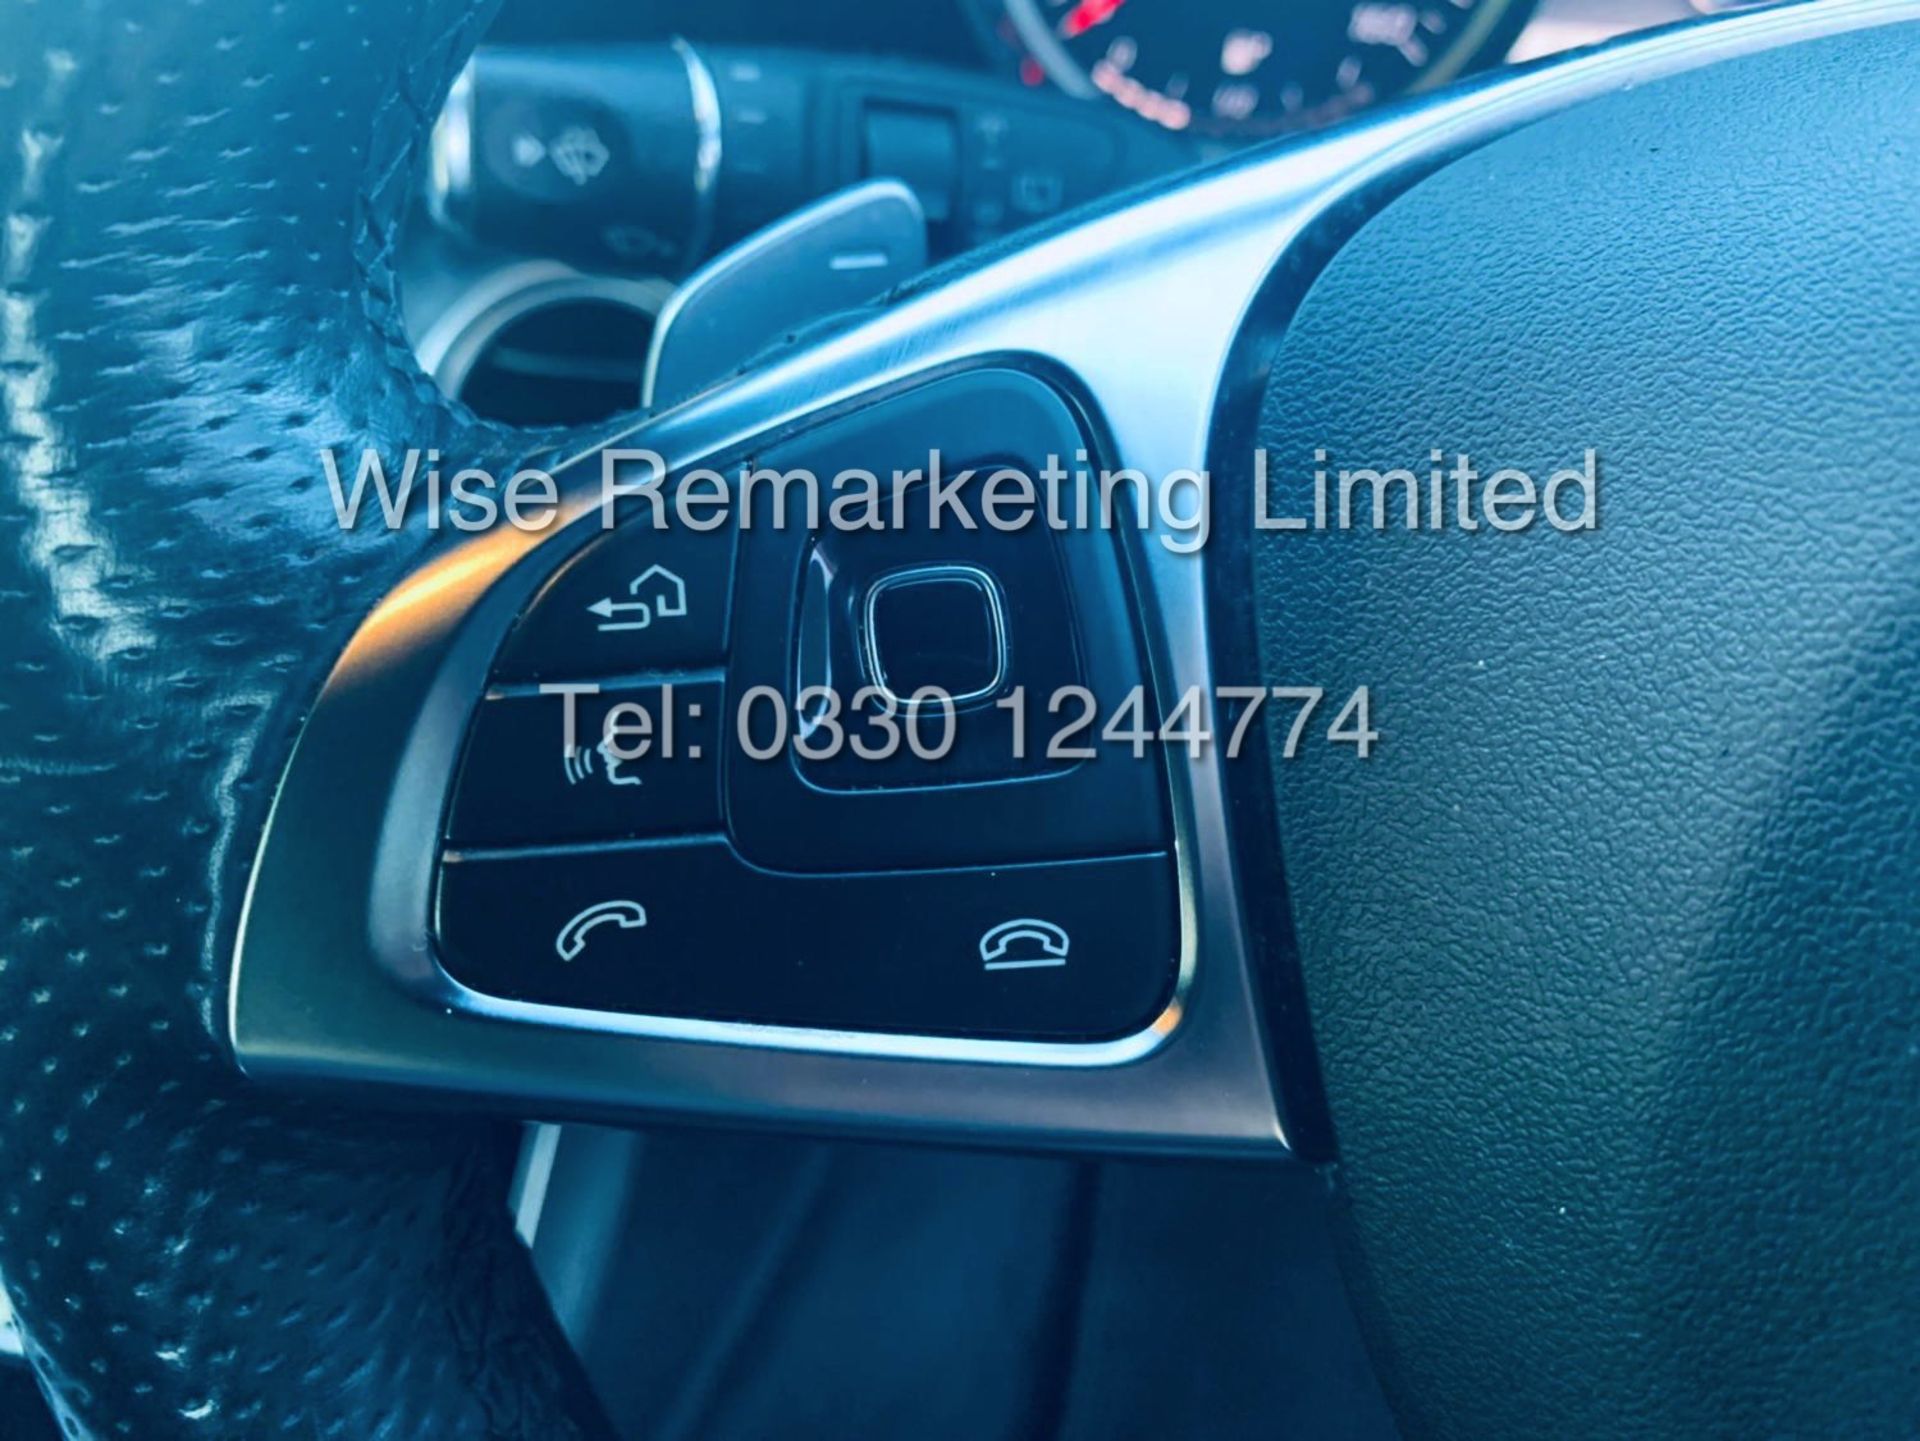 MERCEDES E CLASS ESTATE E220D AMG LINE 2017 / 9G -TRONIC / *LOW MILES* / 1 OWNER - Image 39 of 42